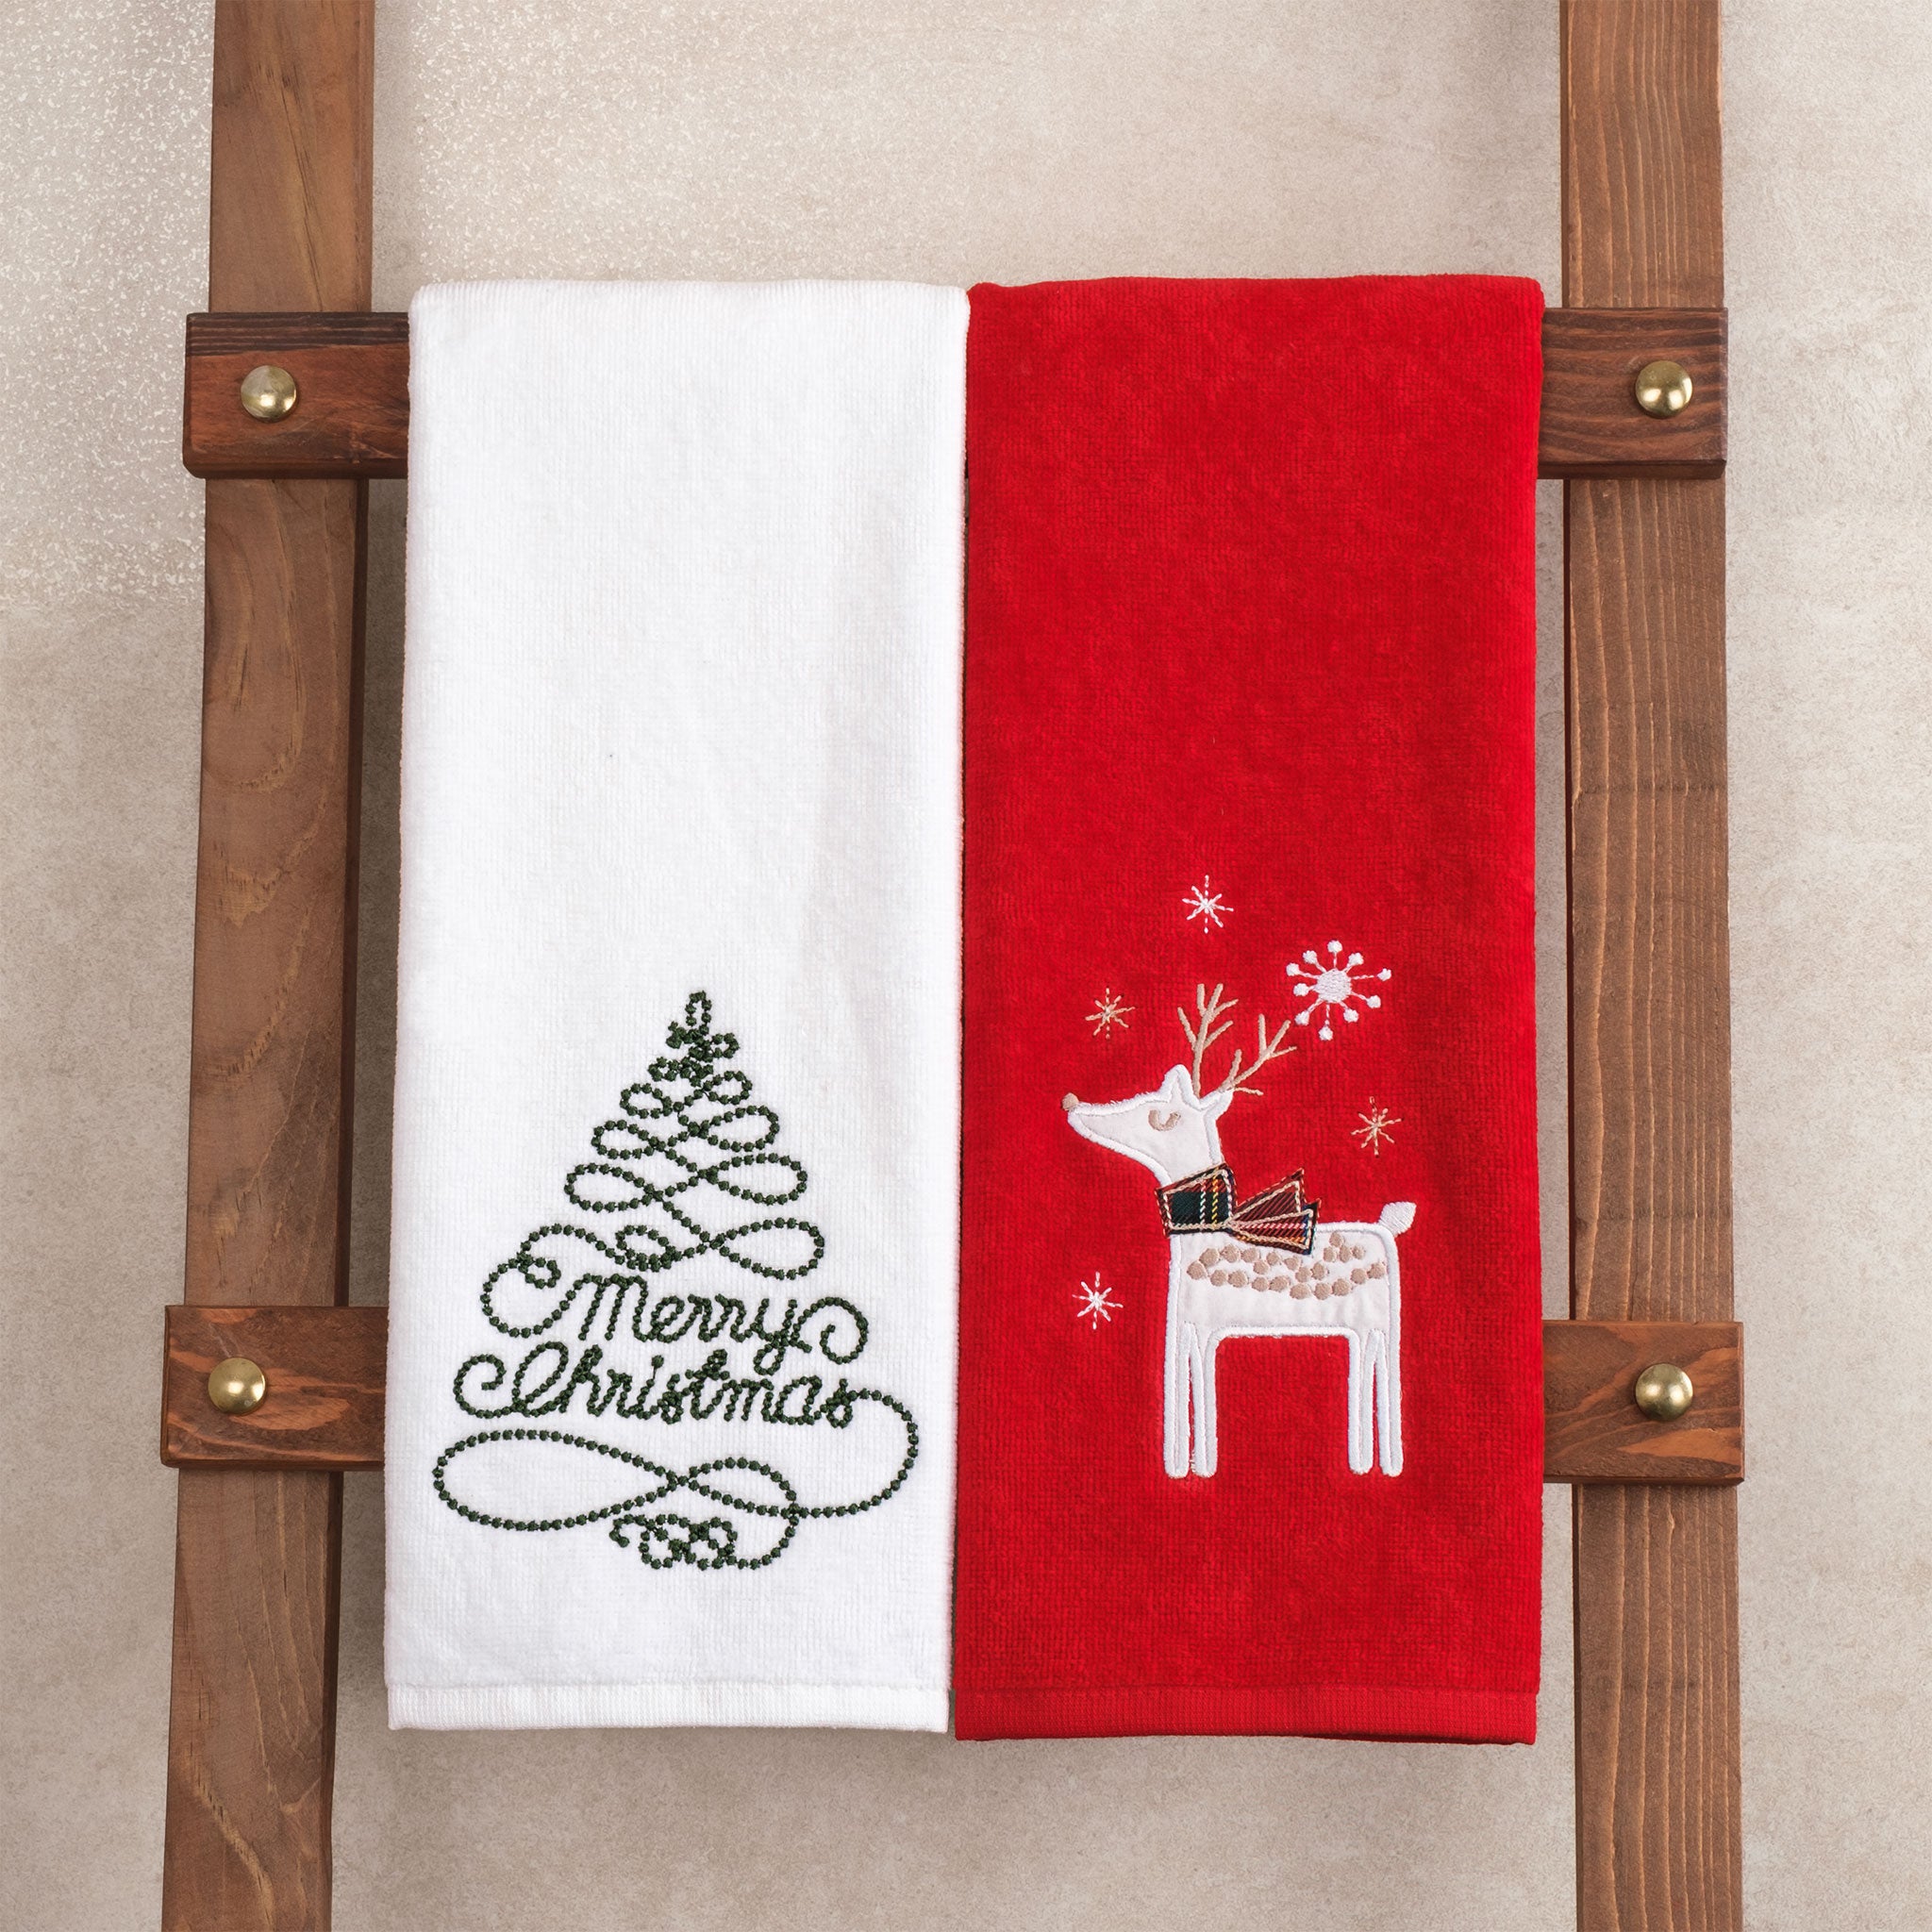 American Soft Linen - Christmas Towels 2 Packed Embroidered Towels for Decor Xmas - Merry Tree-Deery - 6